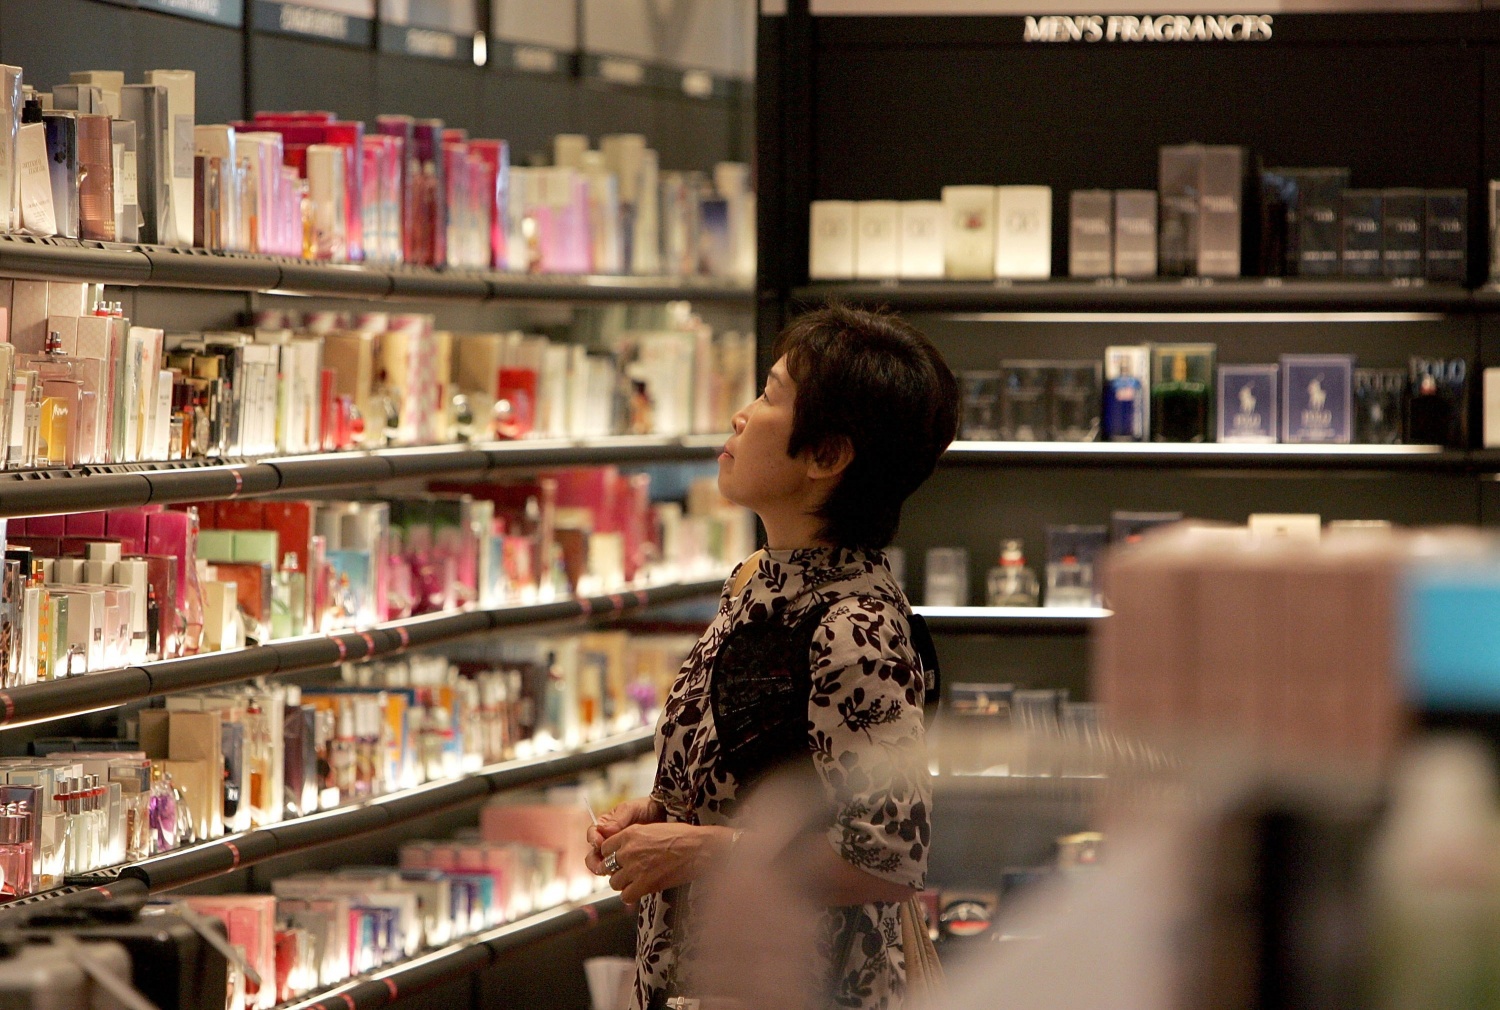 U.S. Raises Air Security Alert to Red -  An woman browses through perfume at a Sephora cosmetics store